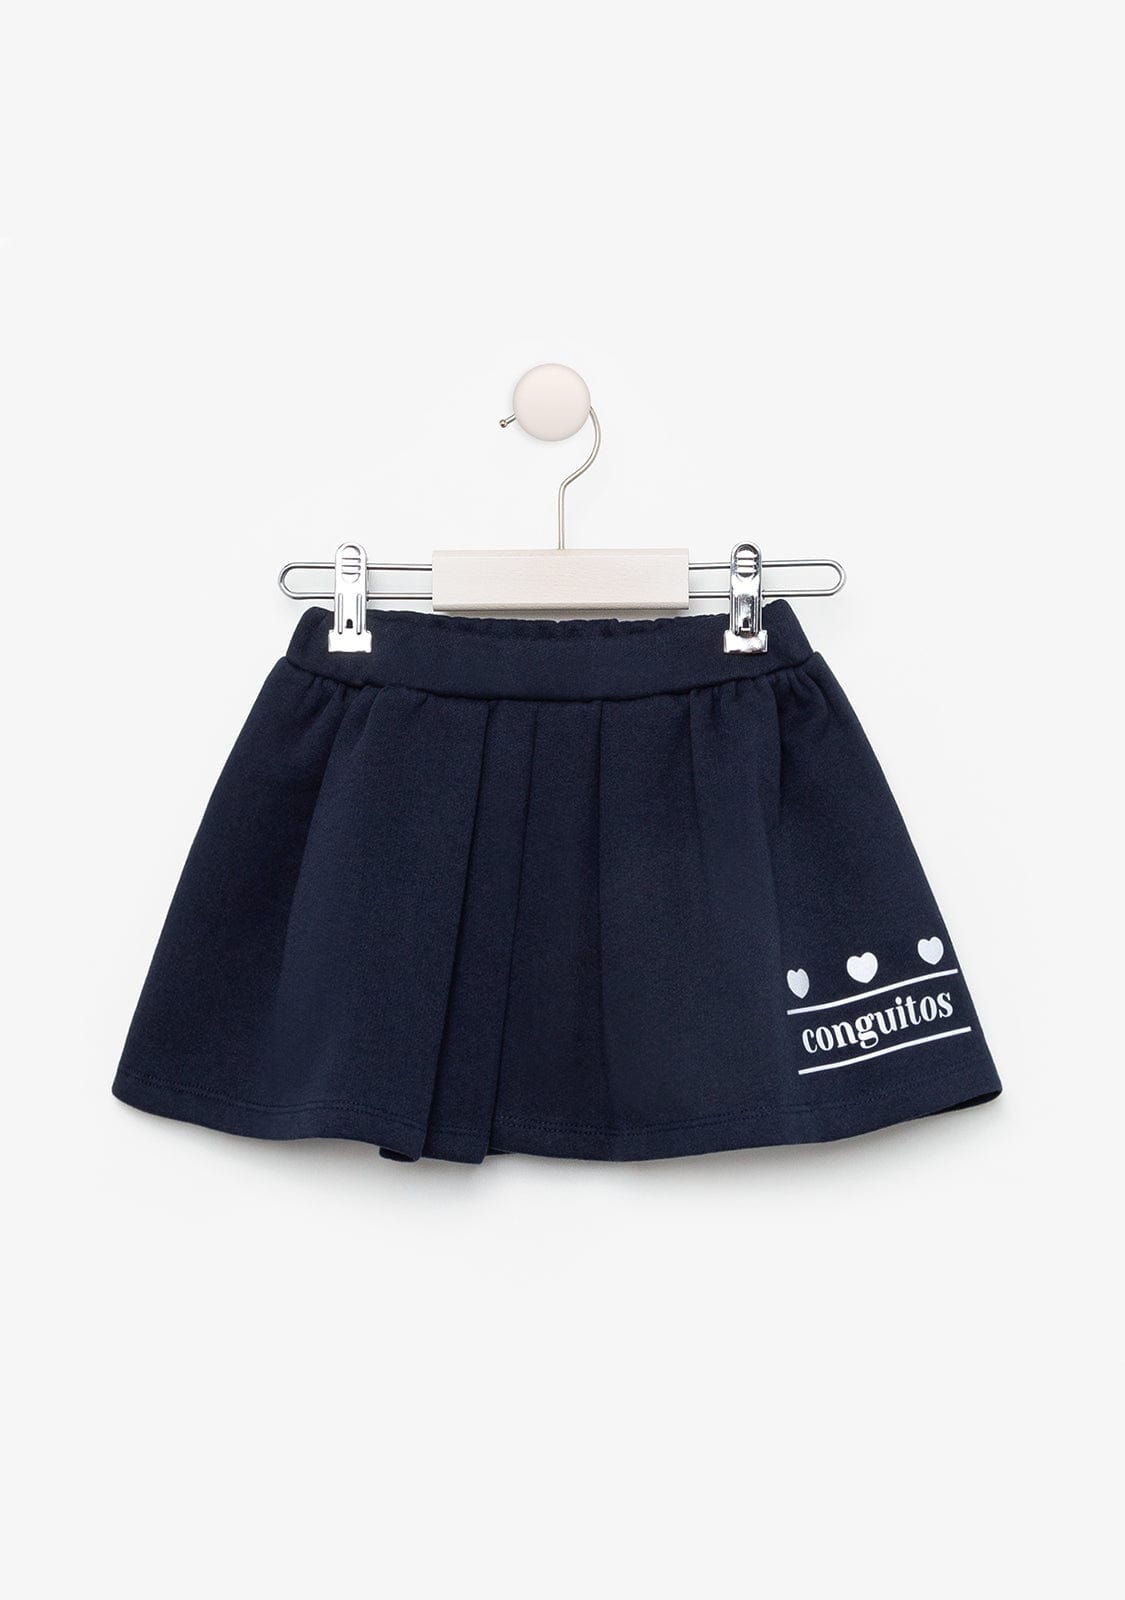 CONGUITOS TEXTIL Clothing Girl's Navy Reflectant Skirt